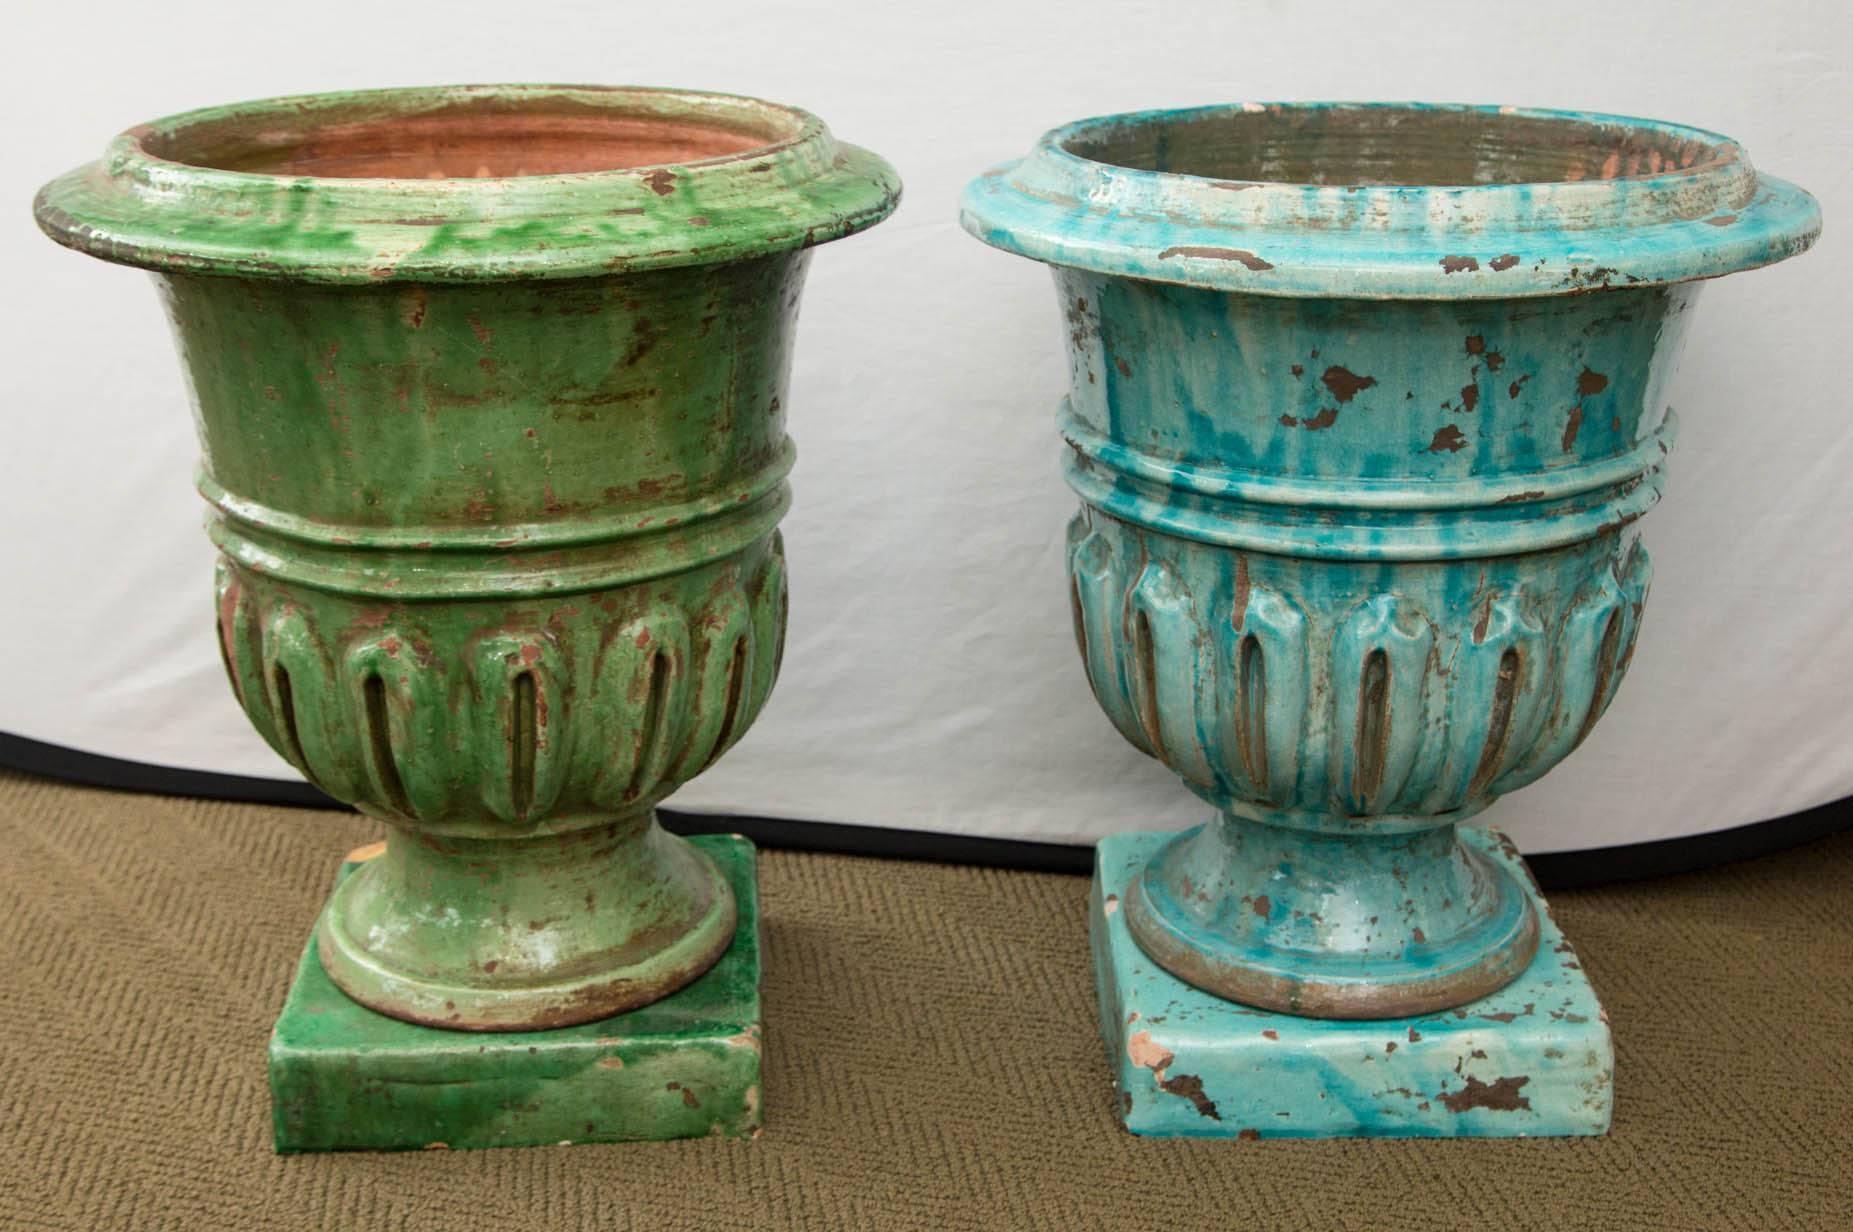 Pair of hand-painted blue and green terracotta planters.